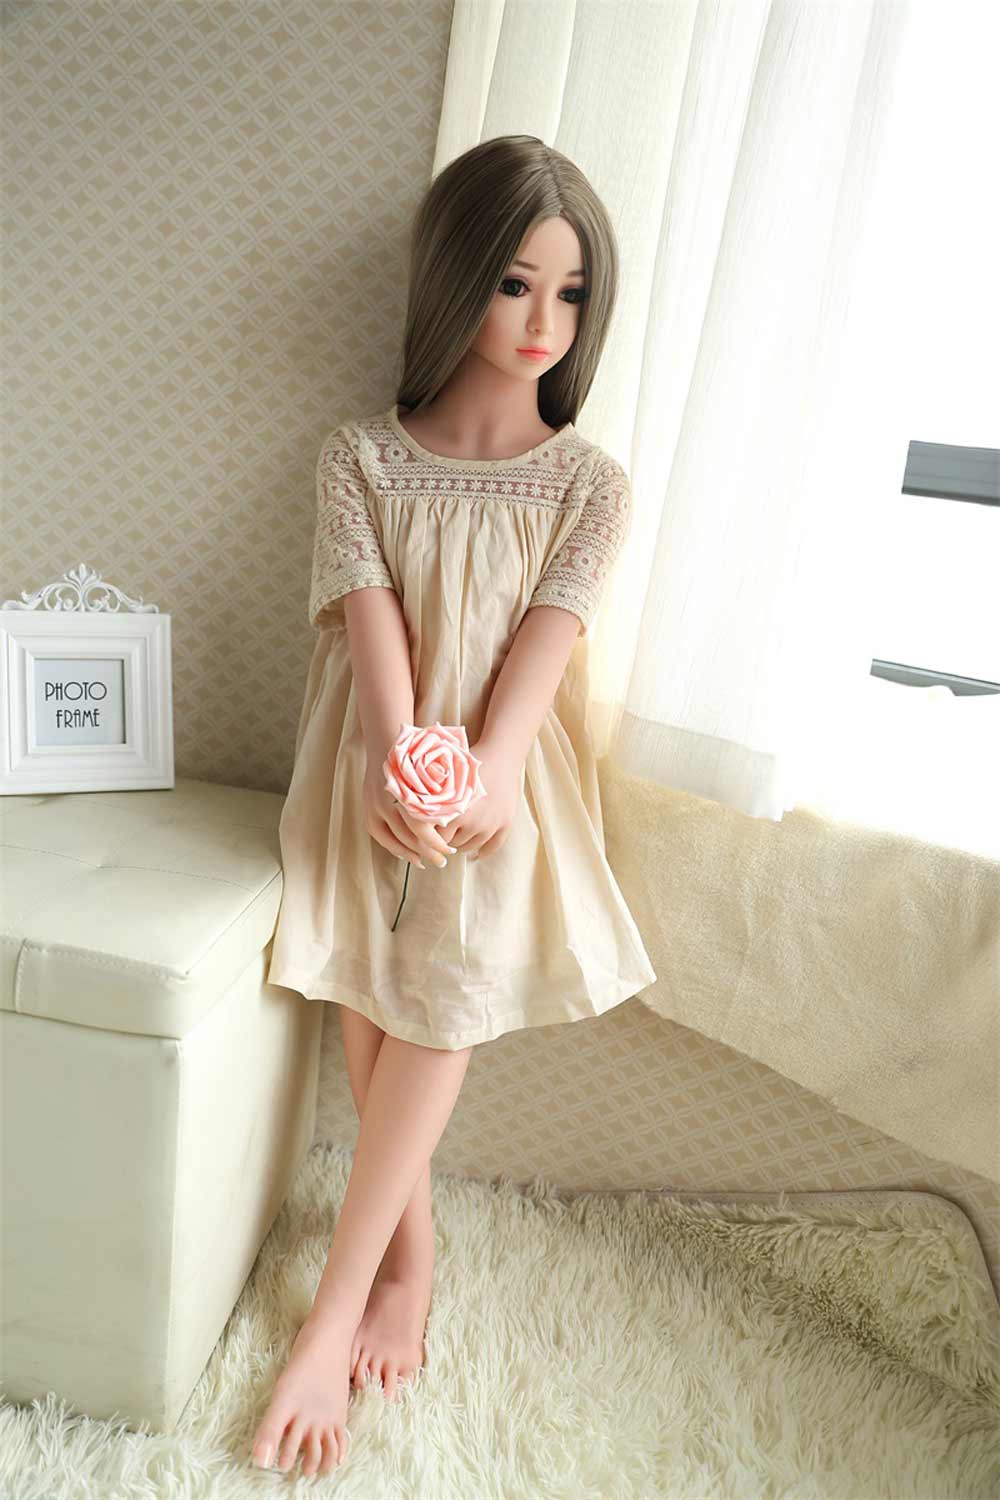 Mini sex doll holding roses in both hands